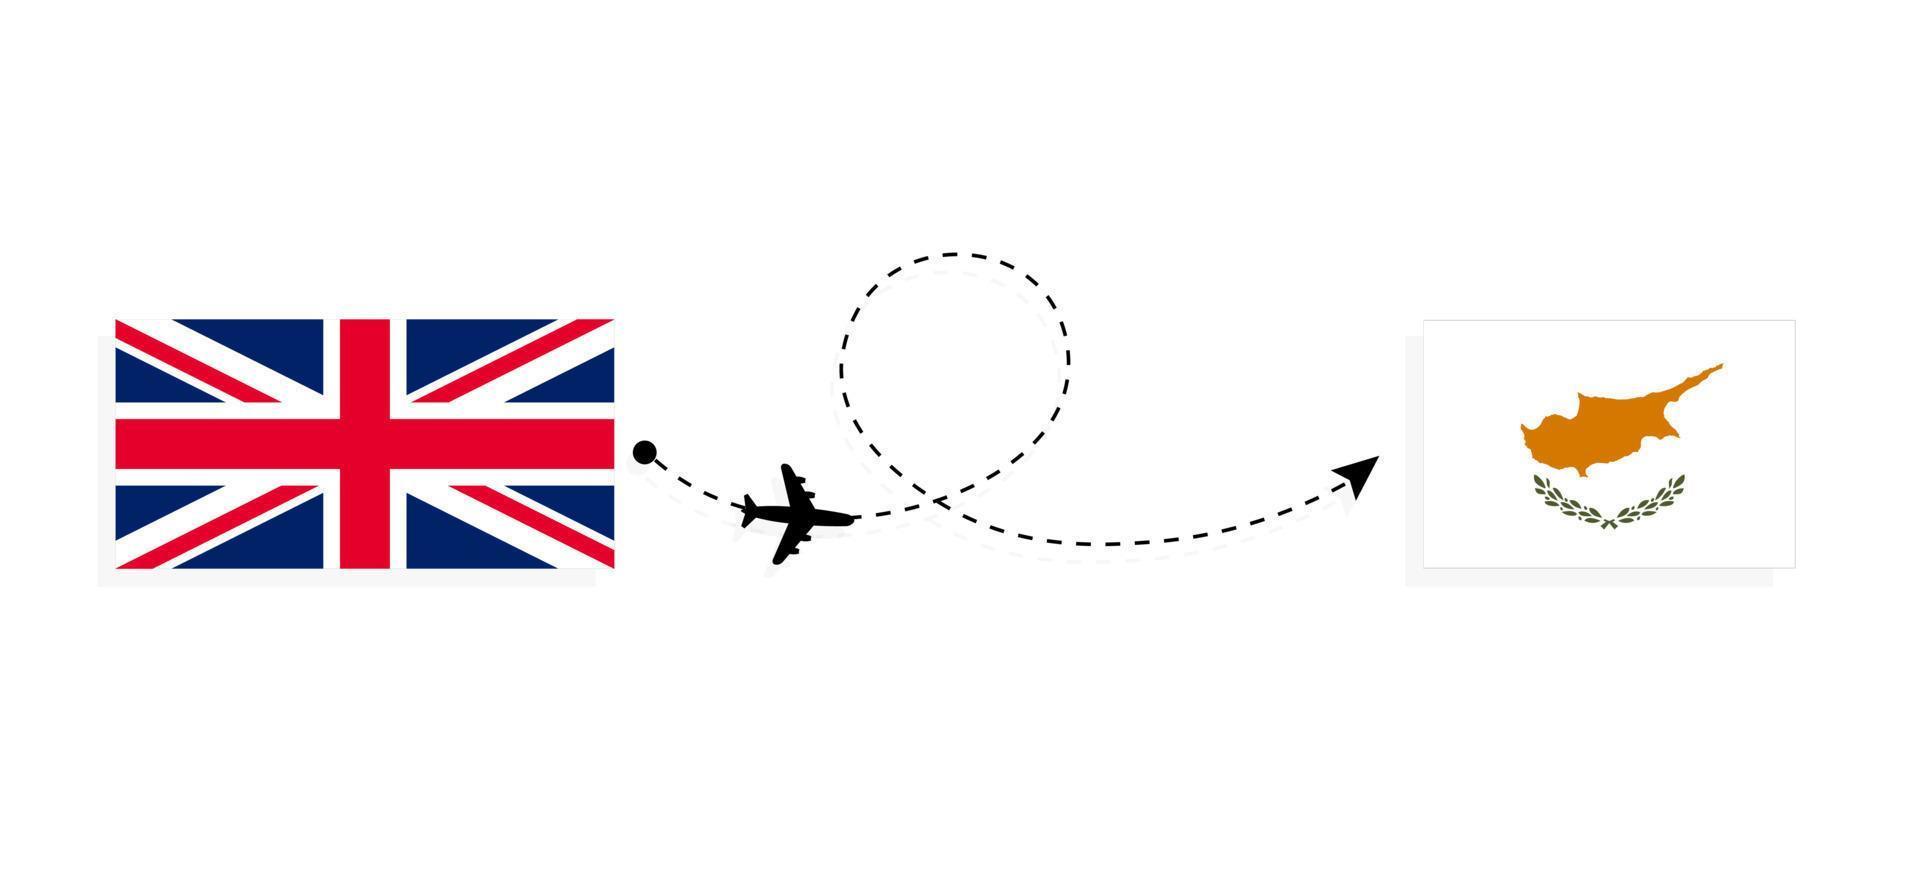 Flight and travel from United Kingdom of Great Britain to Cyprus by passenger airplane Travel concept vector